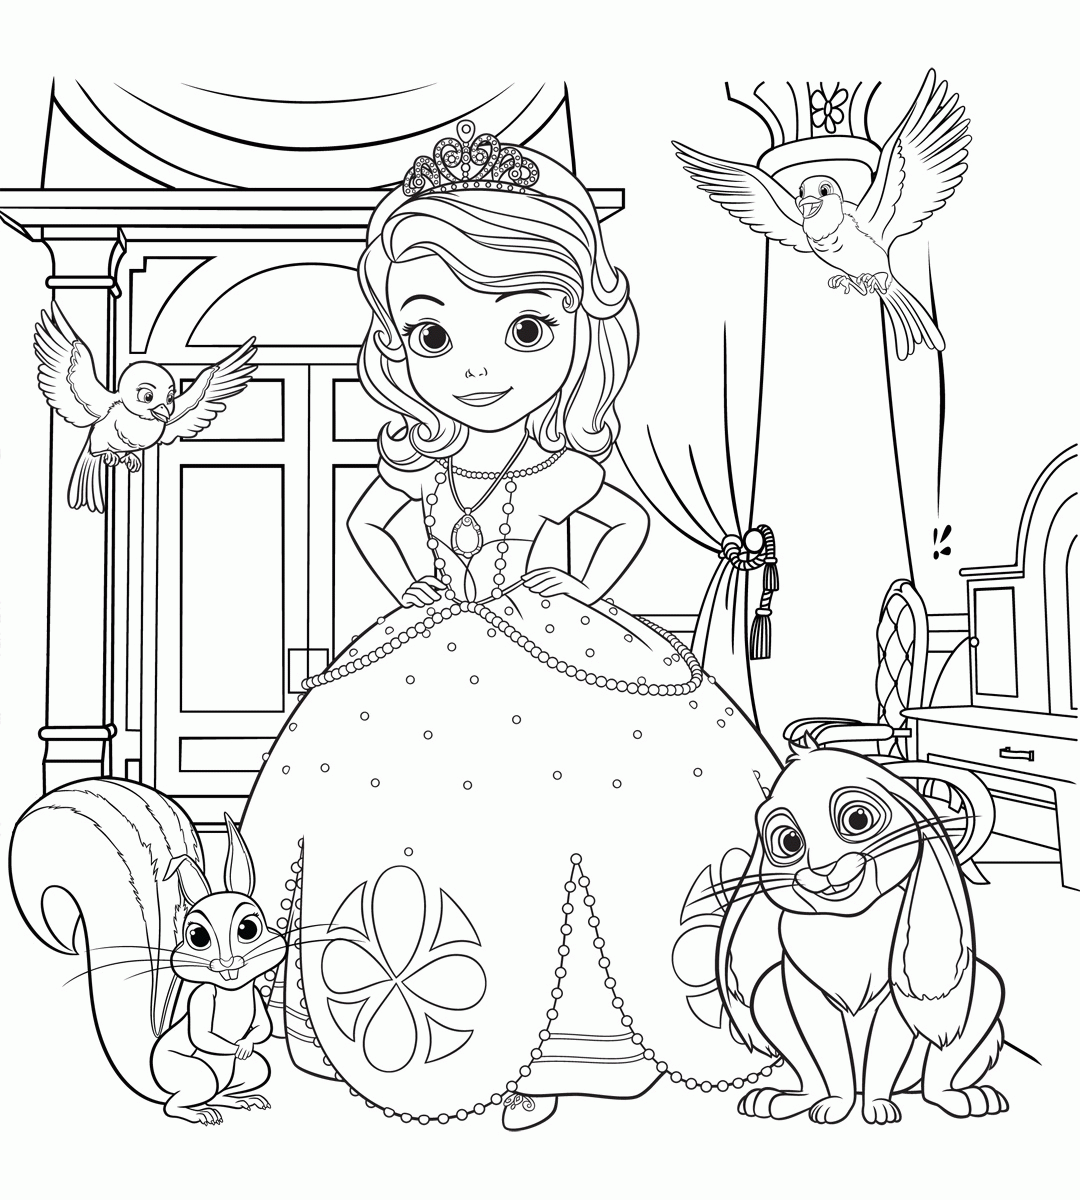 Download Sofia the First Coloring Pages - Best Coloring Pages For Kids